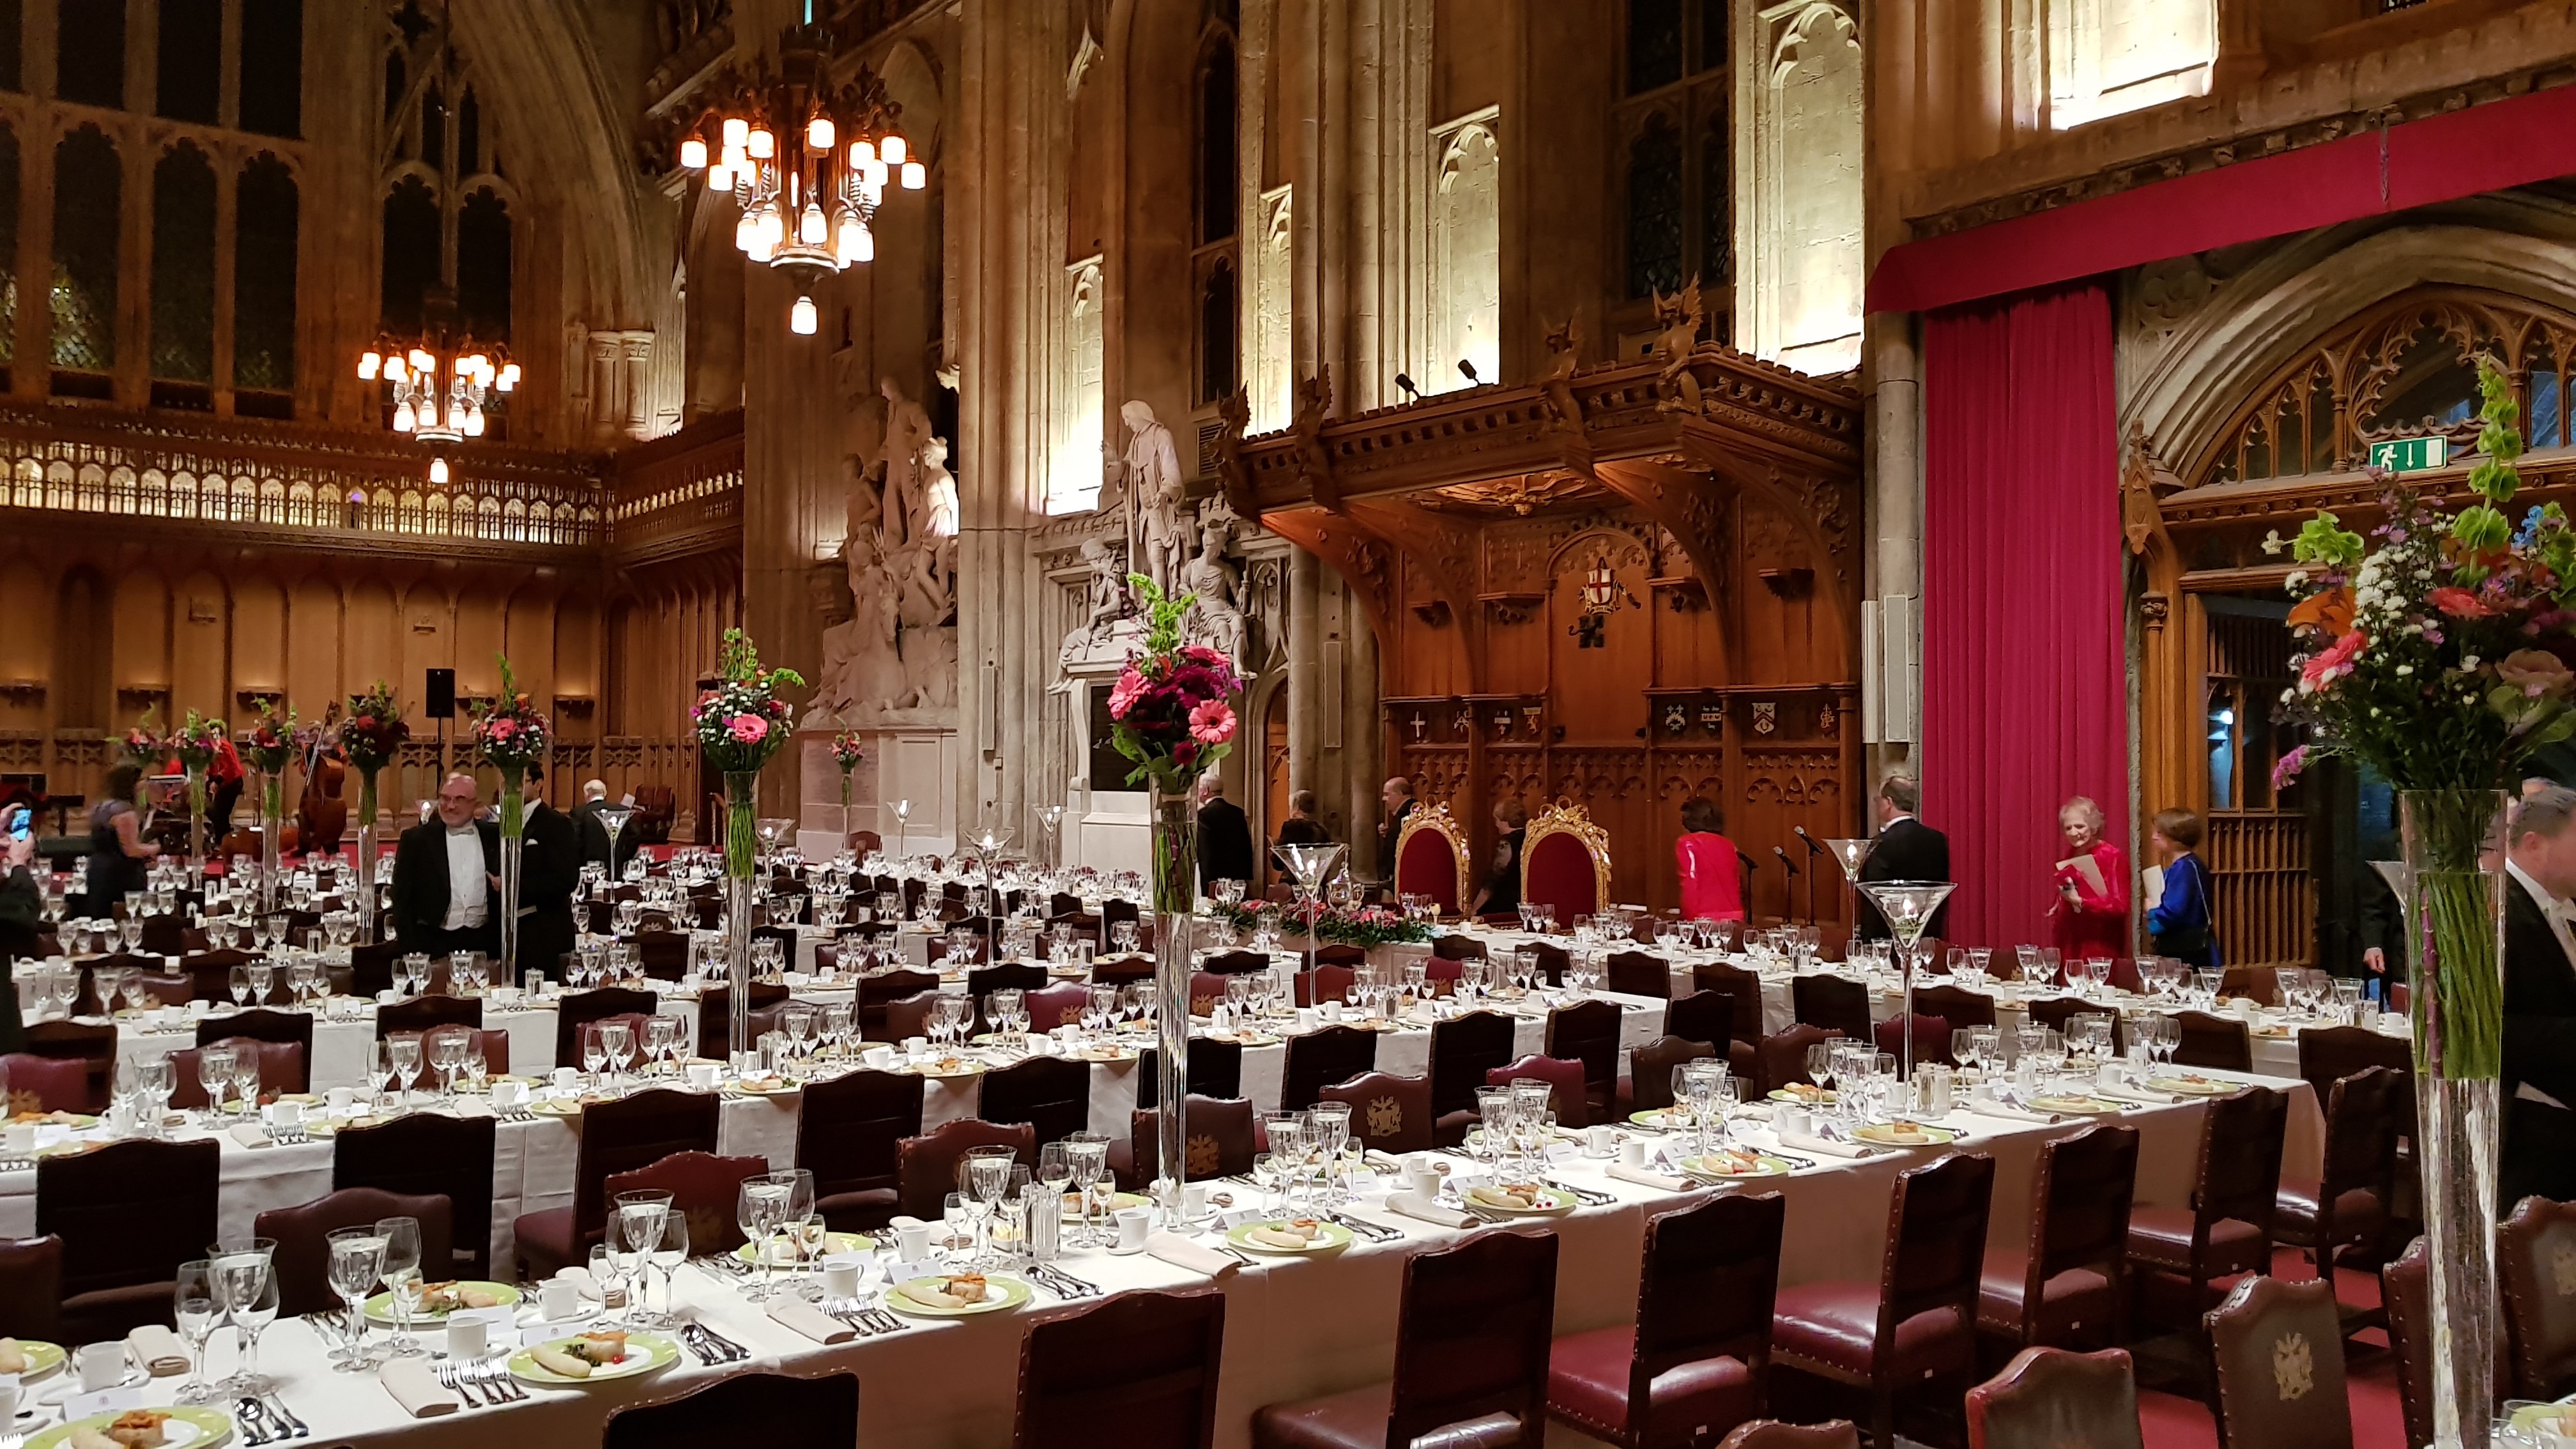 The Guild of Freemen of the City of London - Annual Banquet at Guildhall, Dec 2017